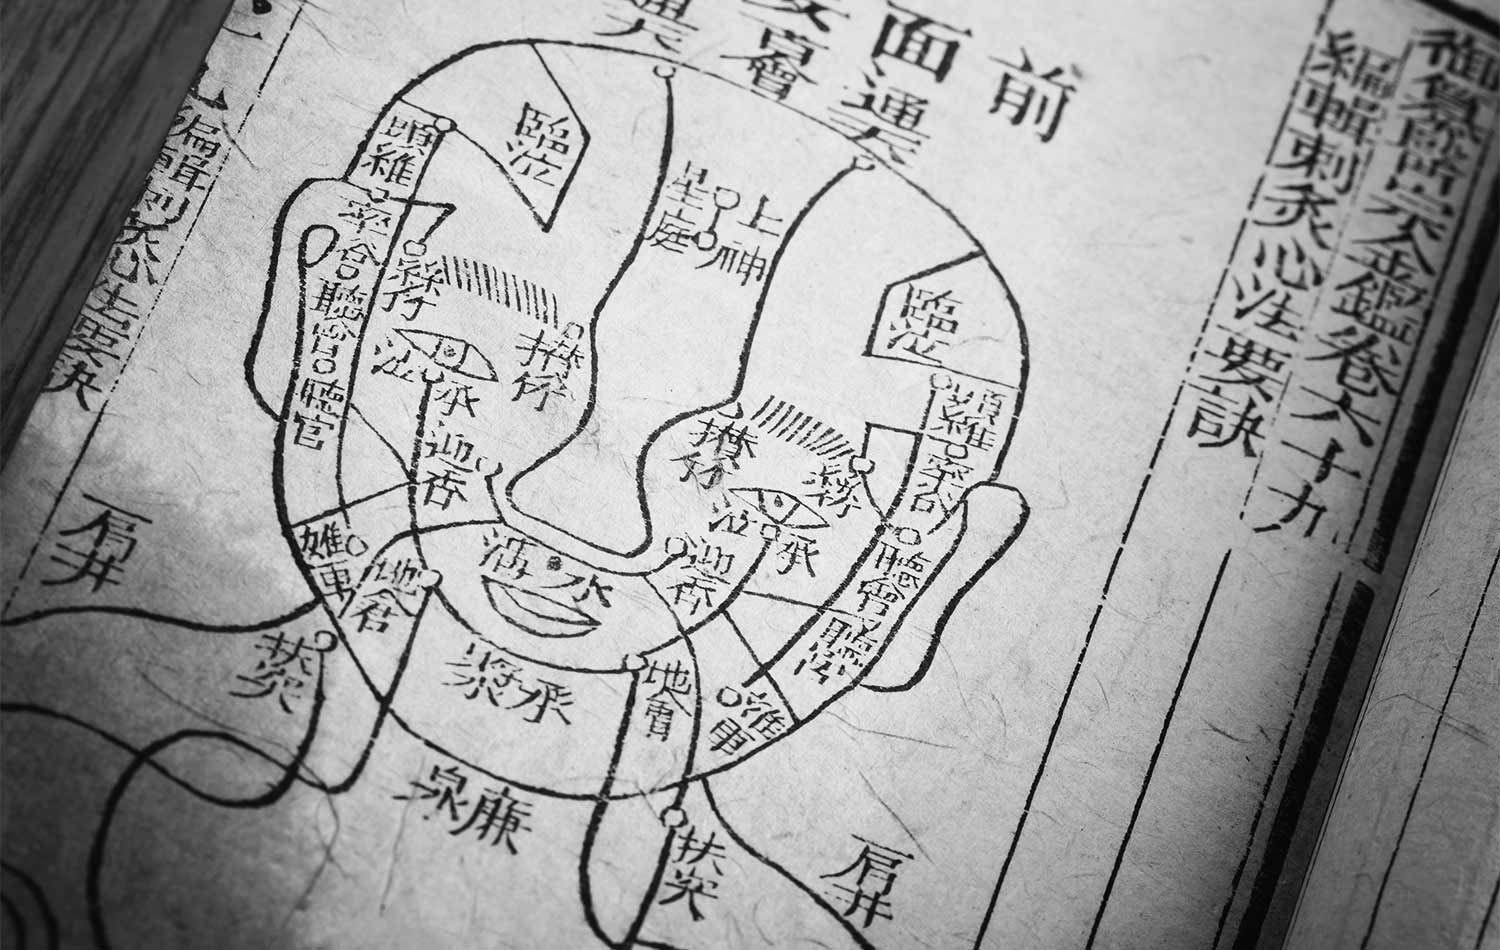 Image of traditional Chinese medicinal practices text